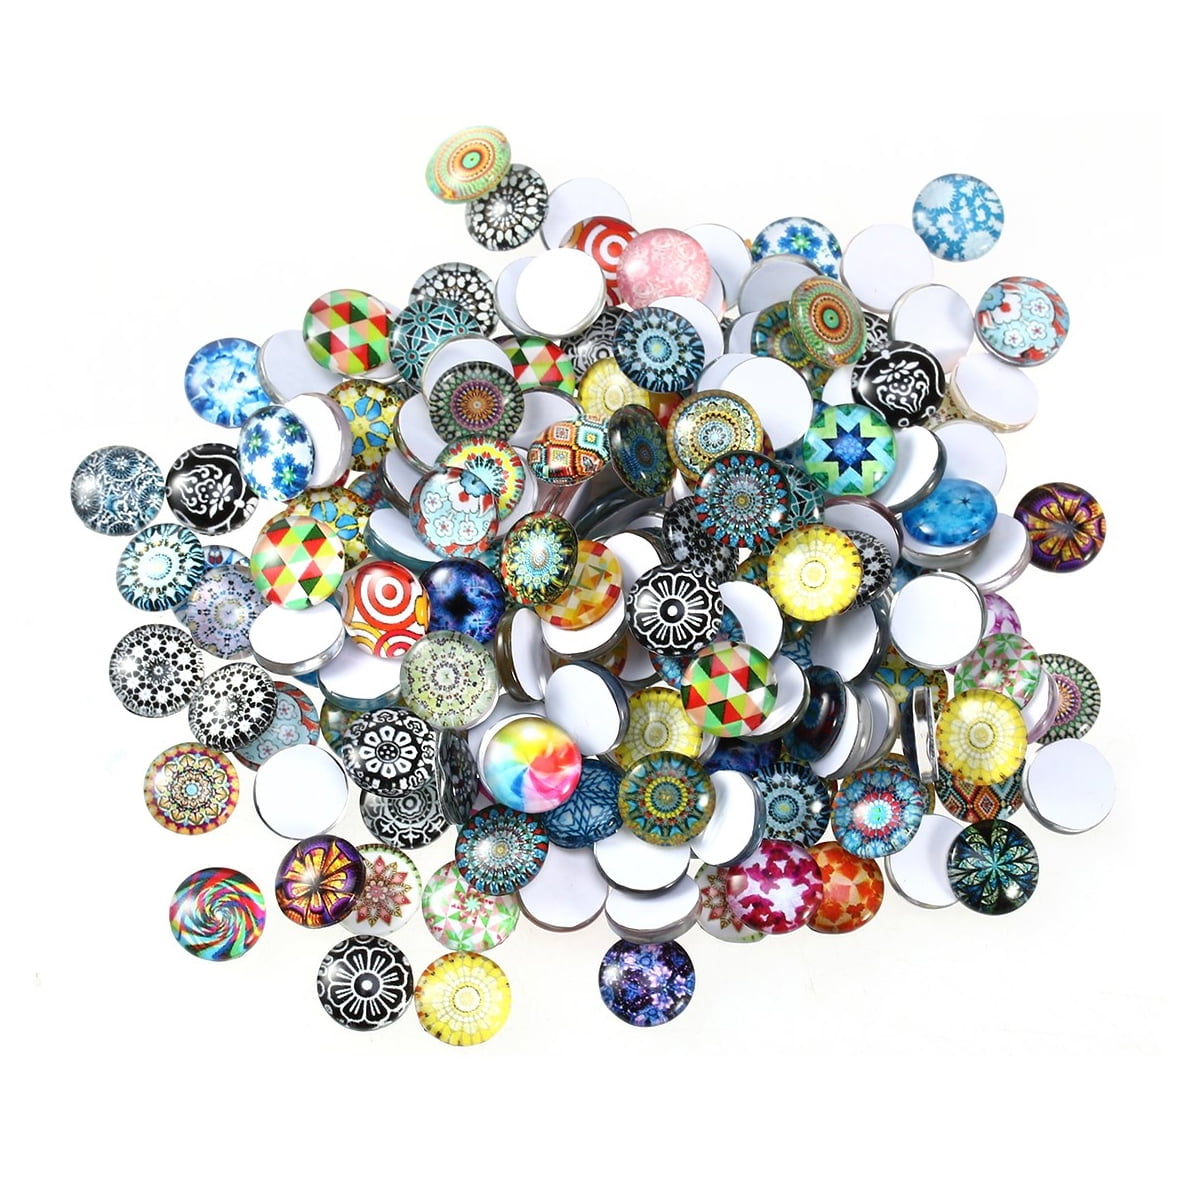 200pcs 12mm Mixed Round Mosaic Tiles DIY Glass Stickers Jewelry Making Supplies 